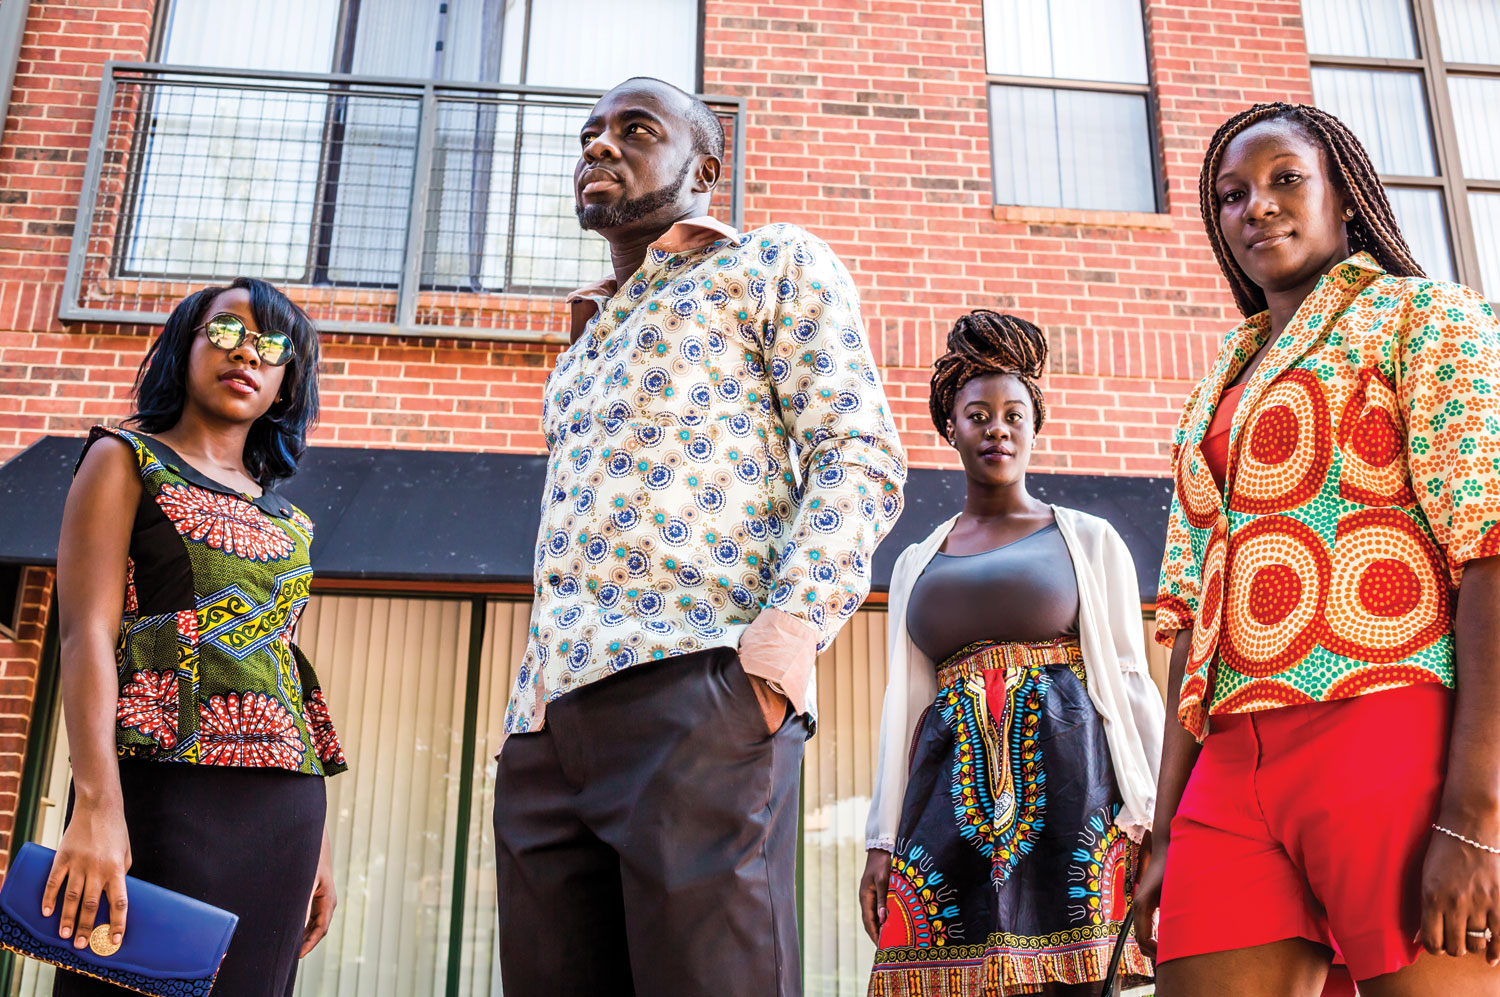 AFRICAN-ACCENTS-CLOTHING-ART-PLANO-MAGAZINE-APPAREL